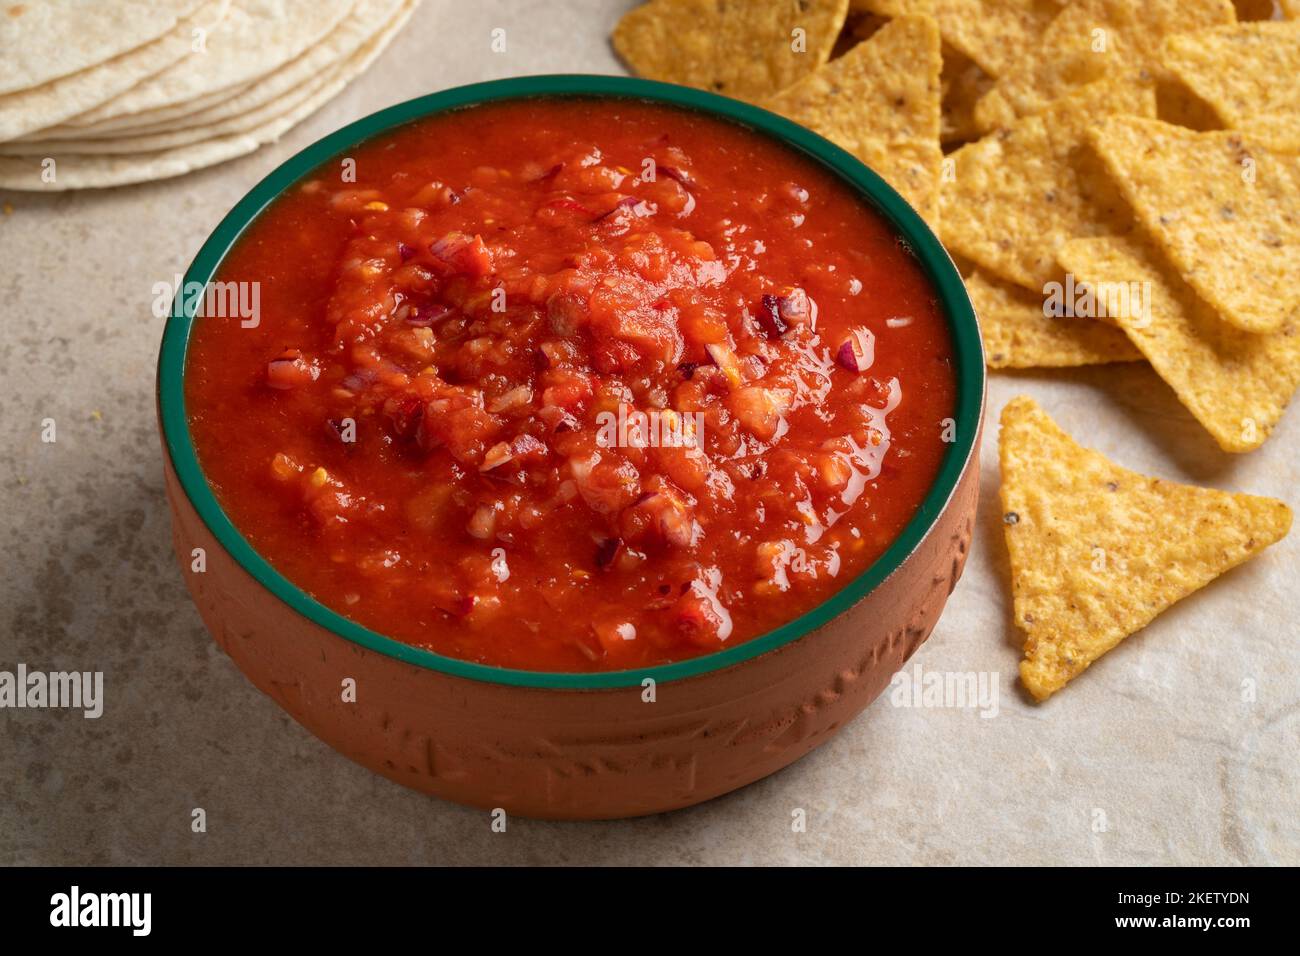 Mexican bowl with fresh made salsa close up with tortillas and chips for a meal Stock Photo